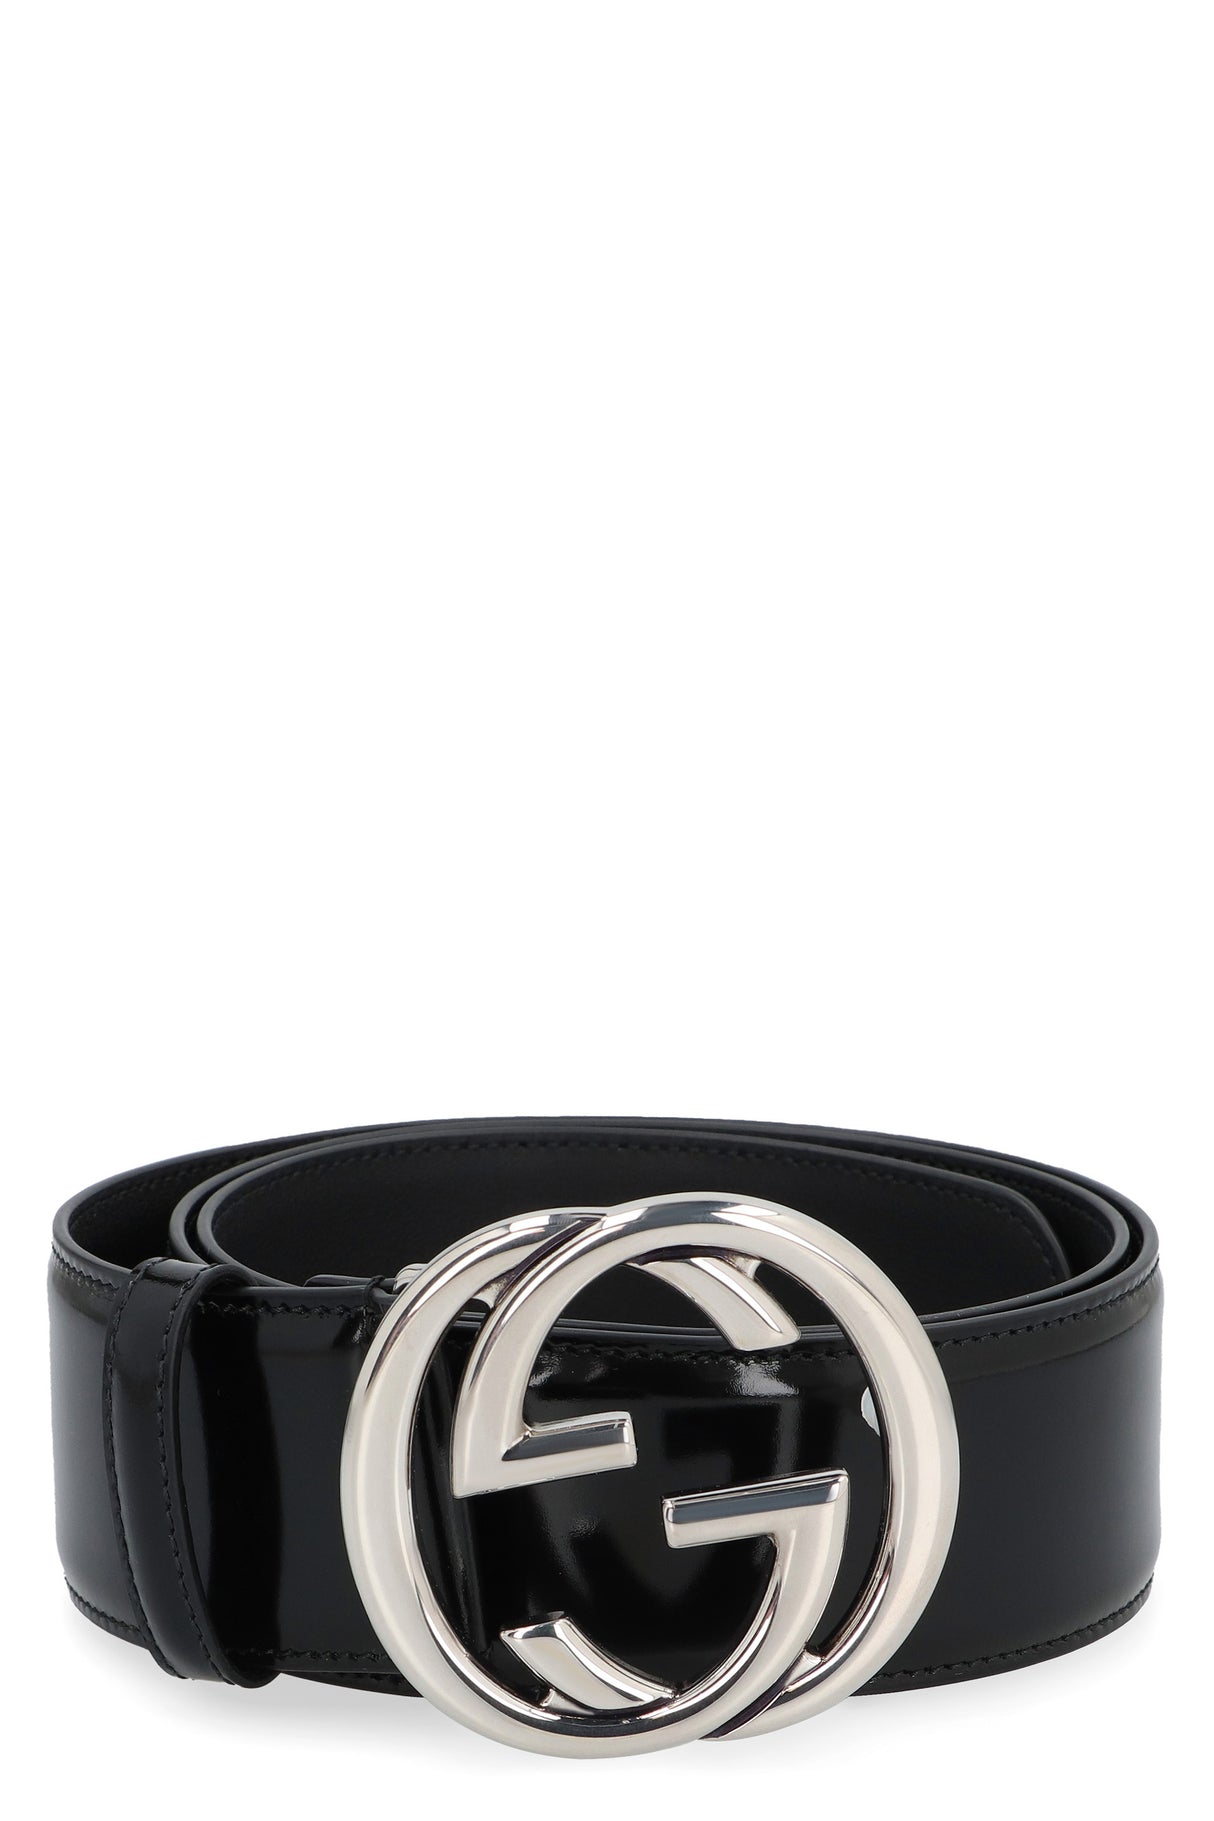 GUCCI Sleek Patent Leather Buckle Belt for the Stylish Modern Woman